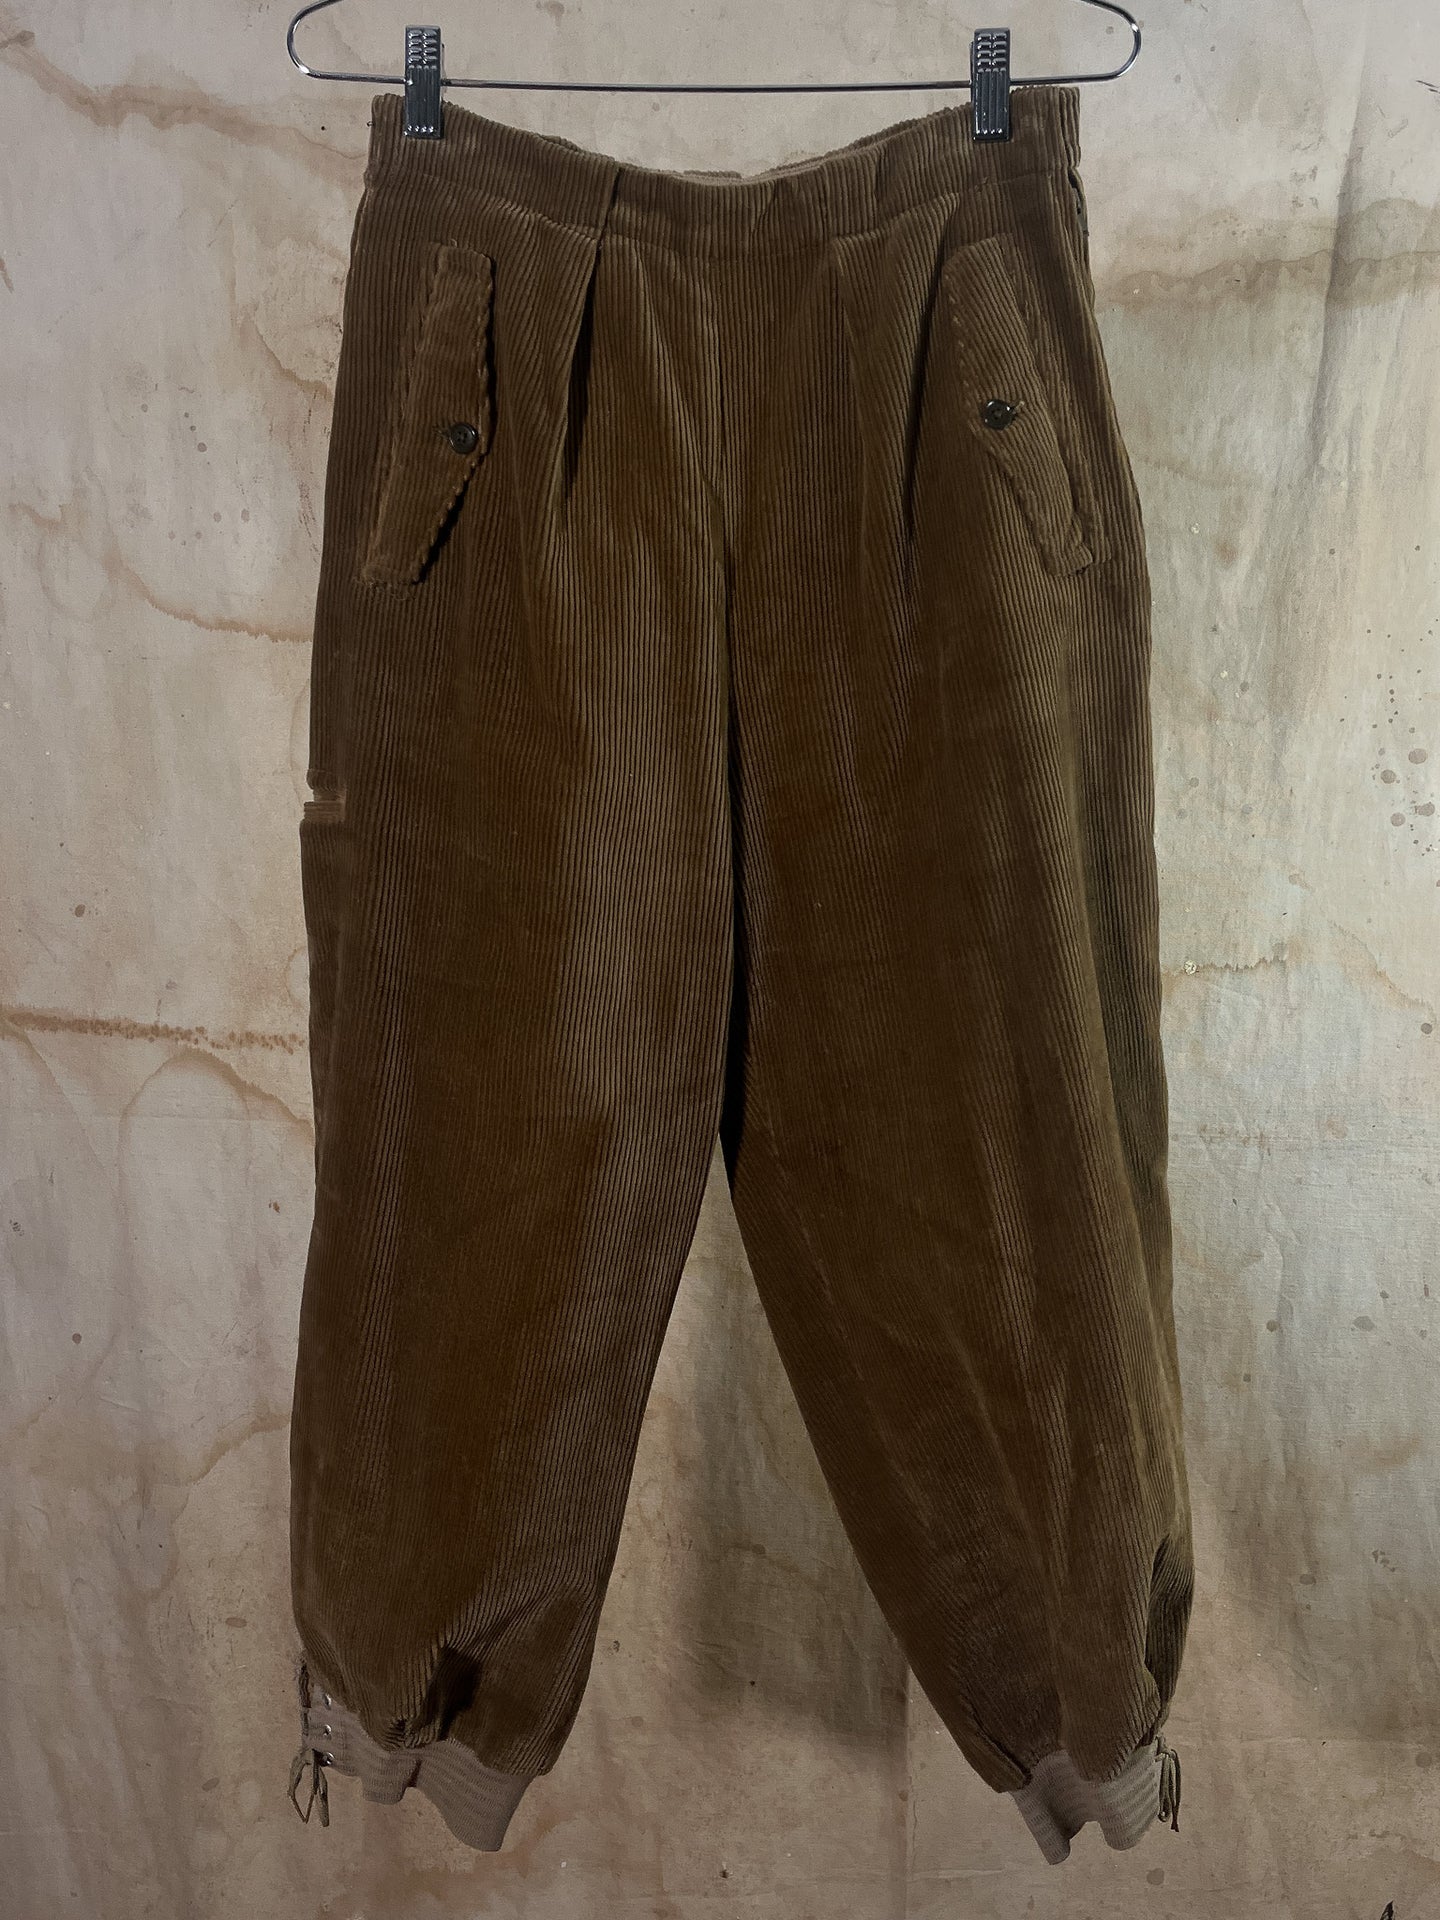 French Golden Brown Corduroy Women's Sport Trousers c.1940s-50s